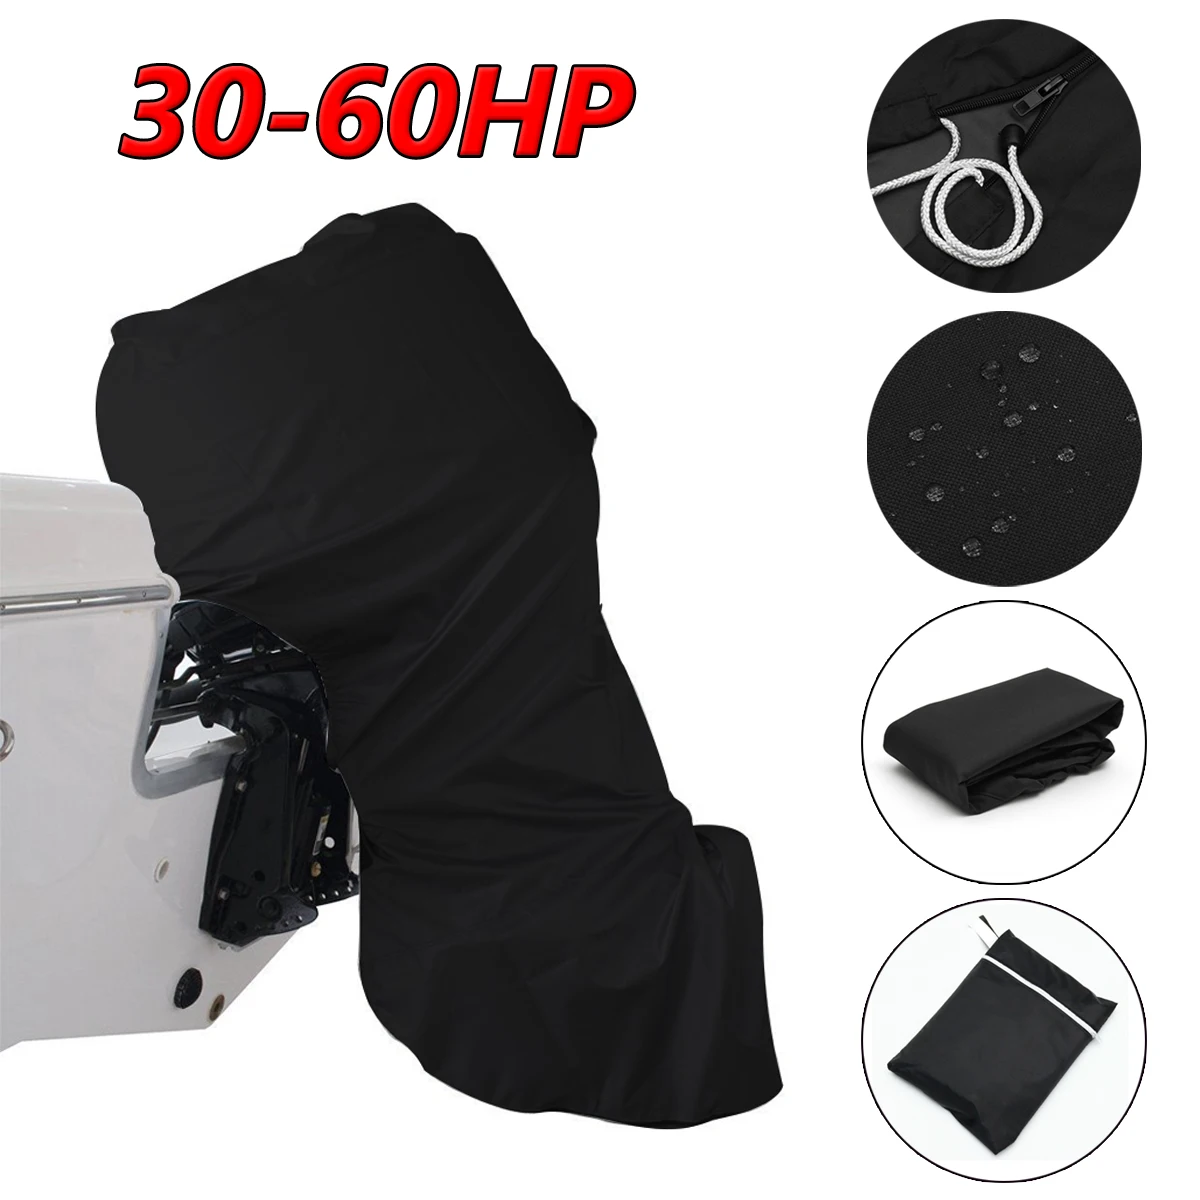 

56.69 inch 600D black boat full outboard engine cover, used for 30-60 hose power motor waterproof